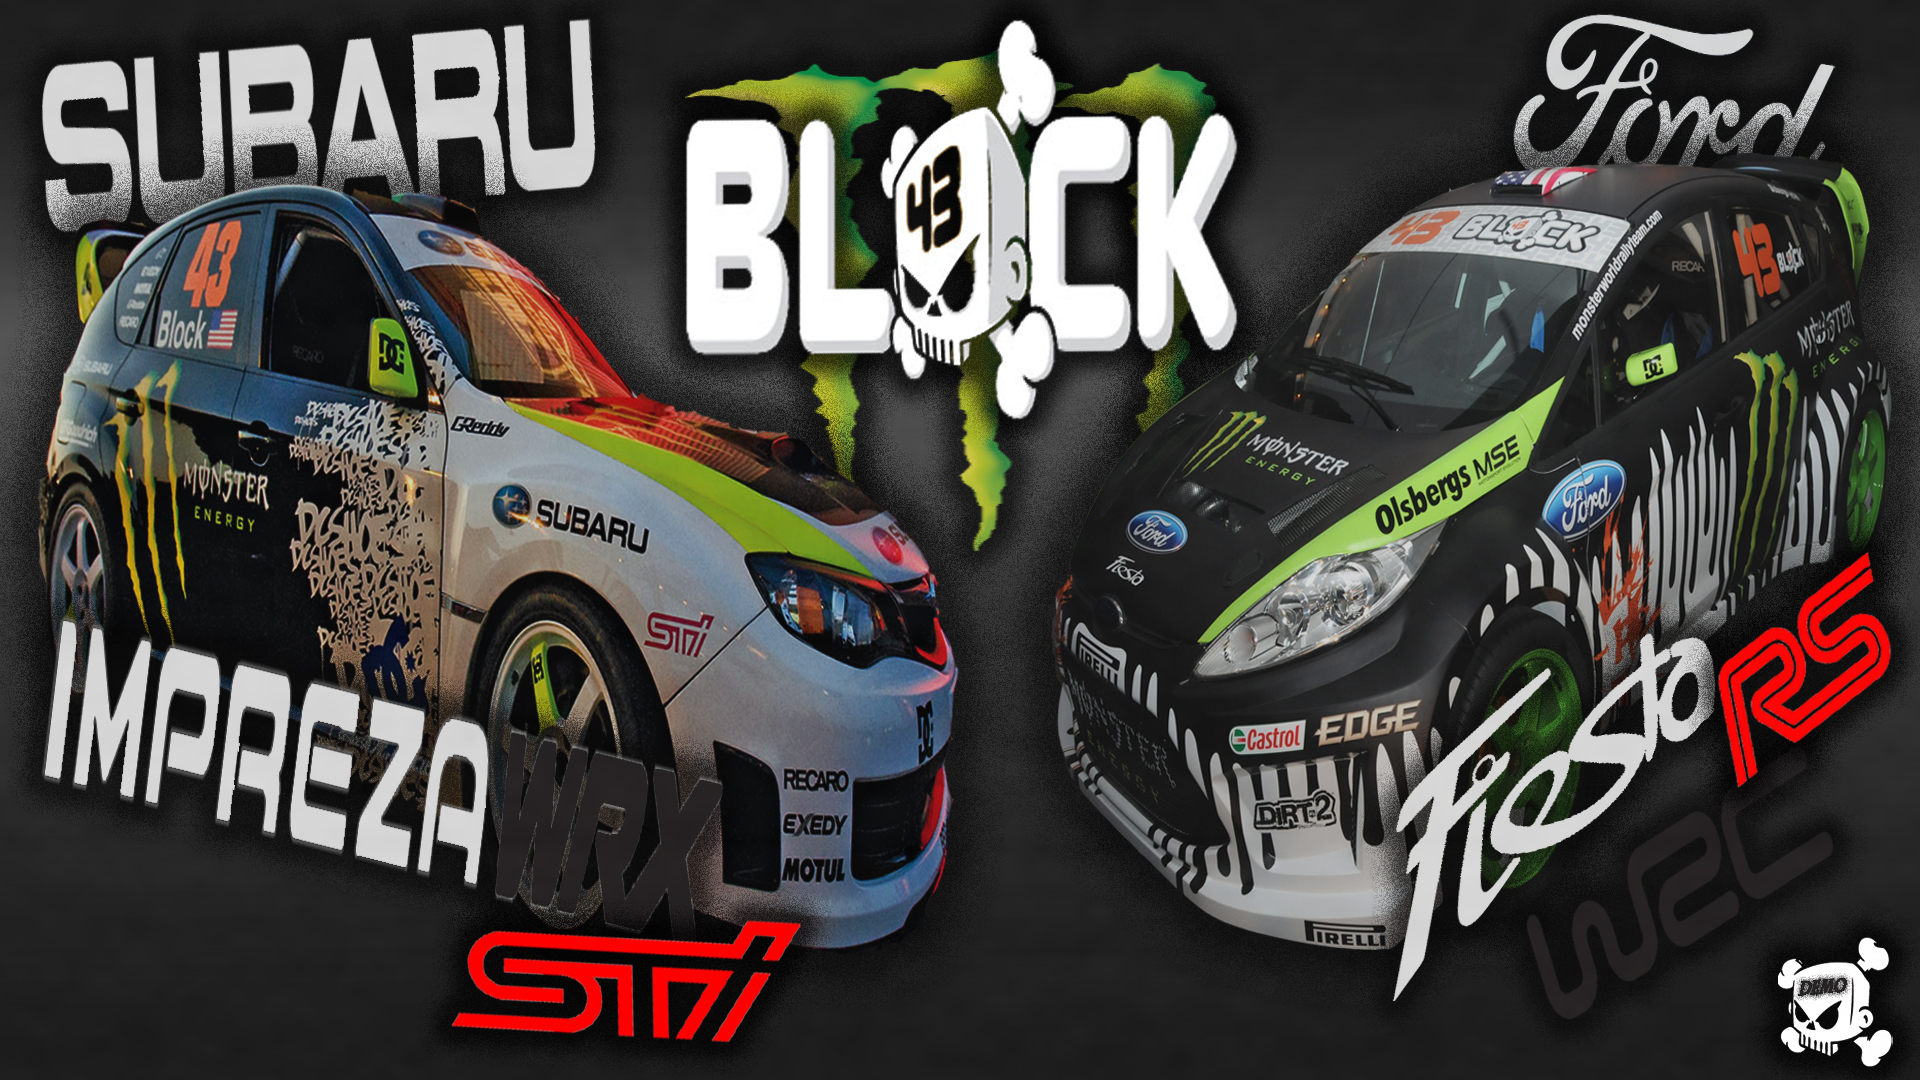 Block STi WRC - a visually striking desktop wallpaper featuring a Ford and Subaru car in action.